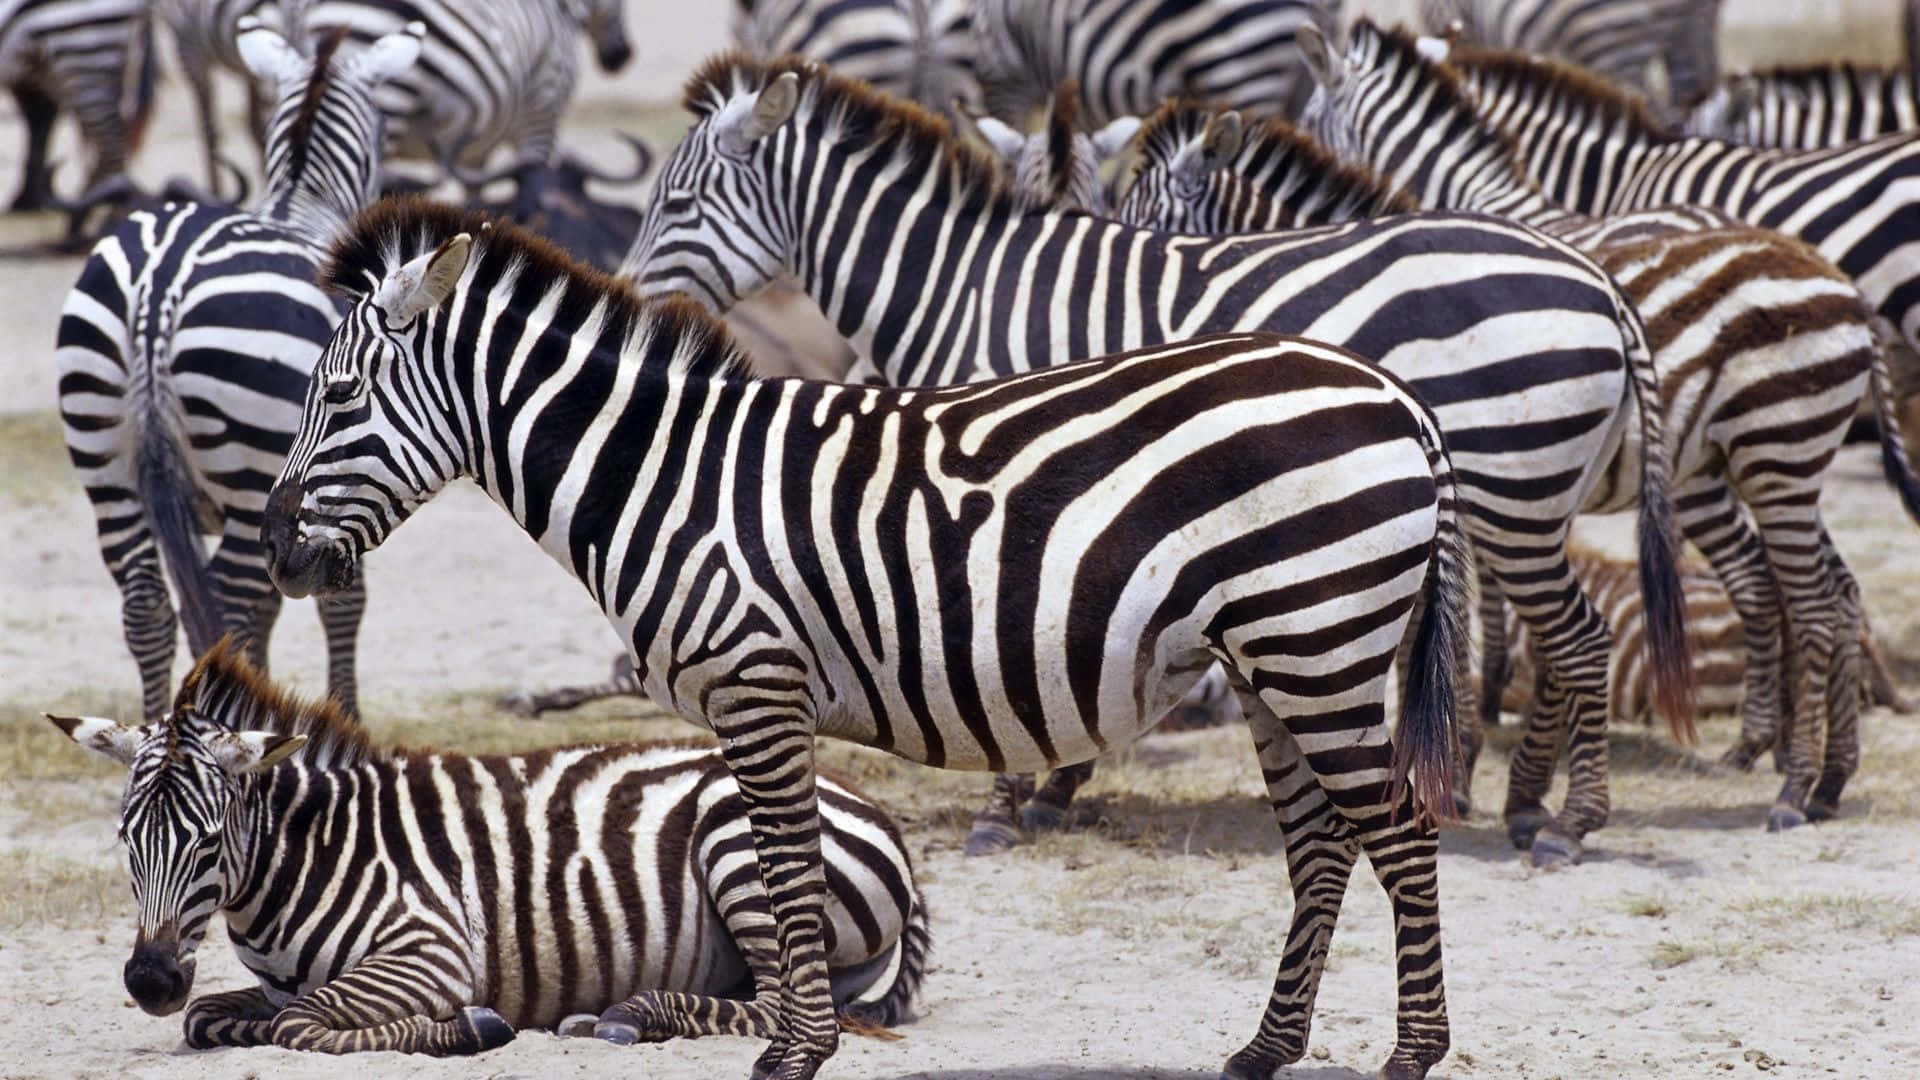 An abstract black and white zebra with a beautiful striped pattern